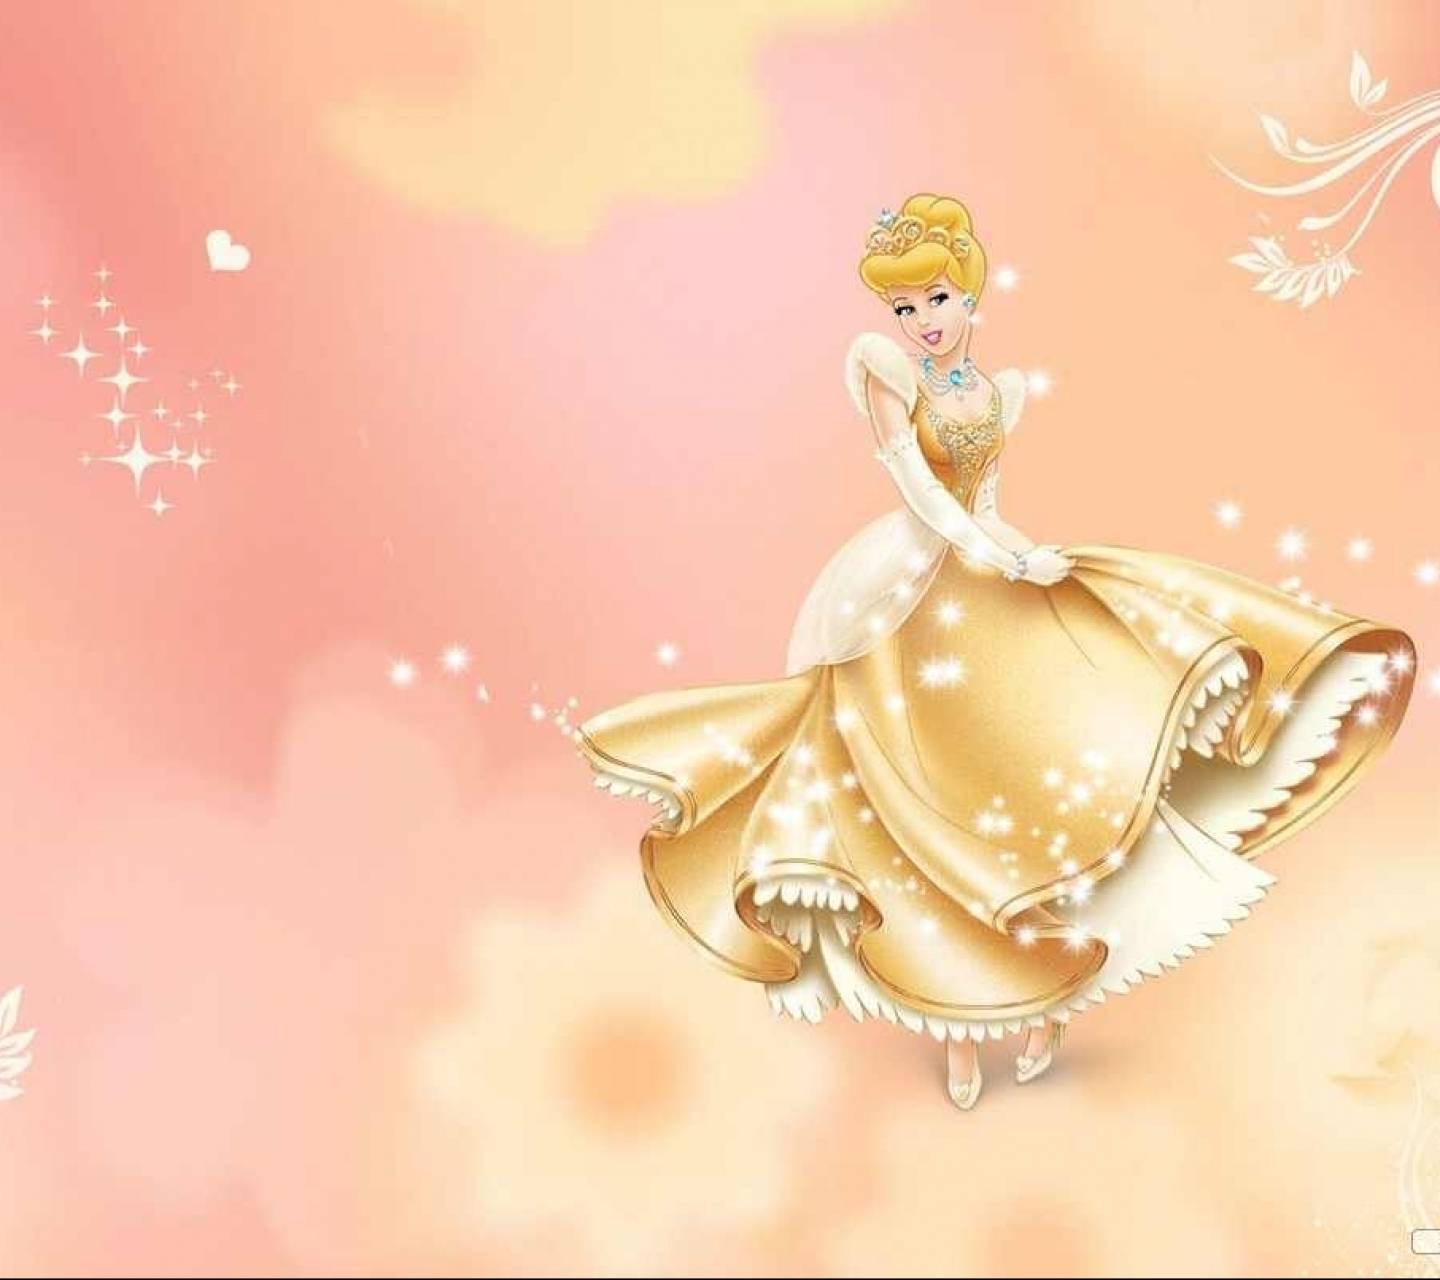 Cinderella Wallpapers For Mobile - Wallpaper Cave